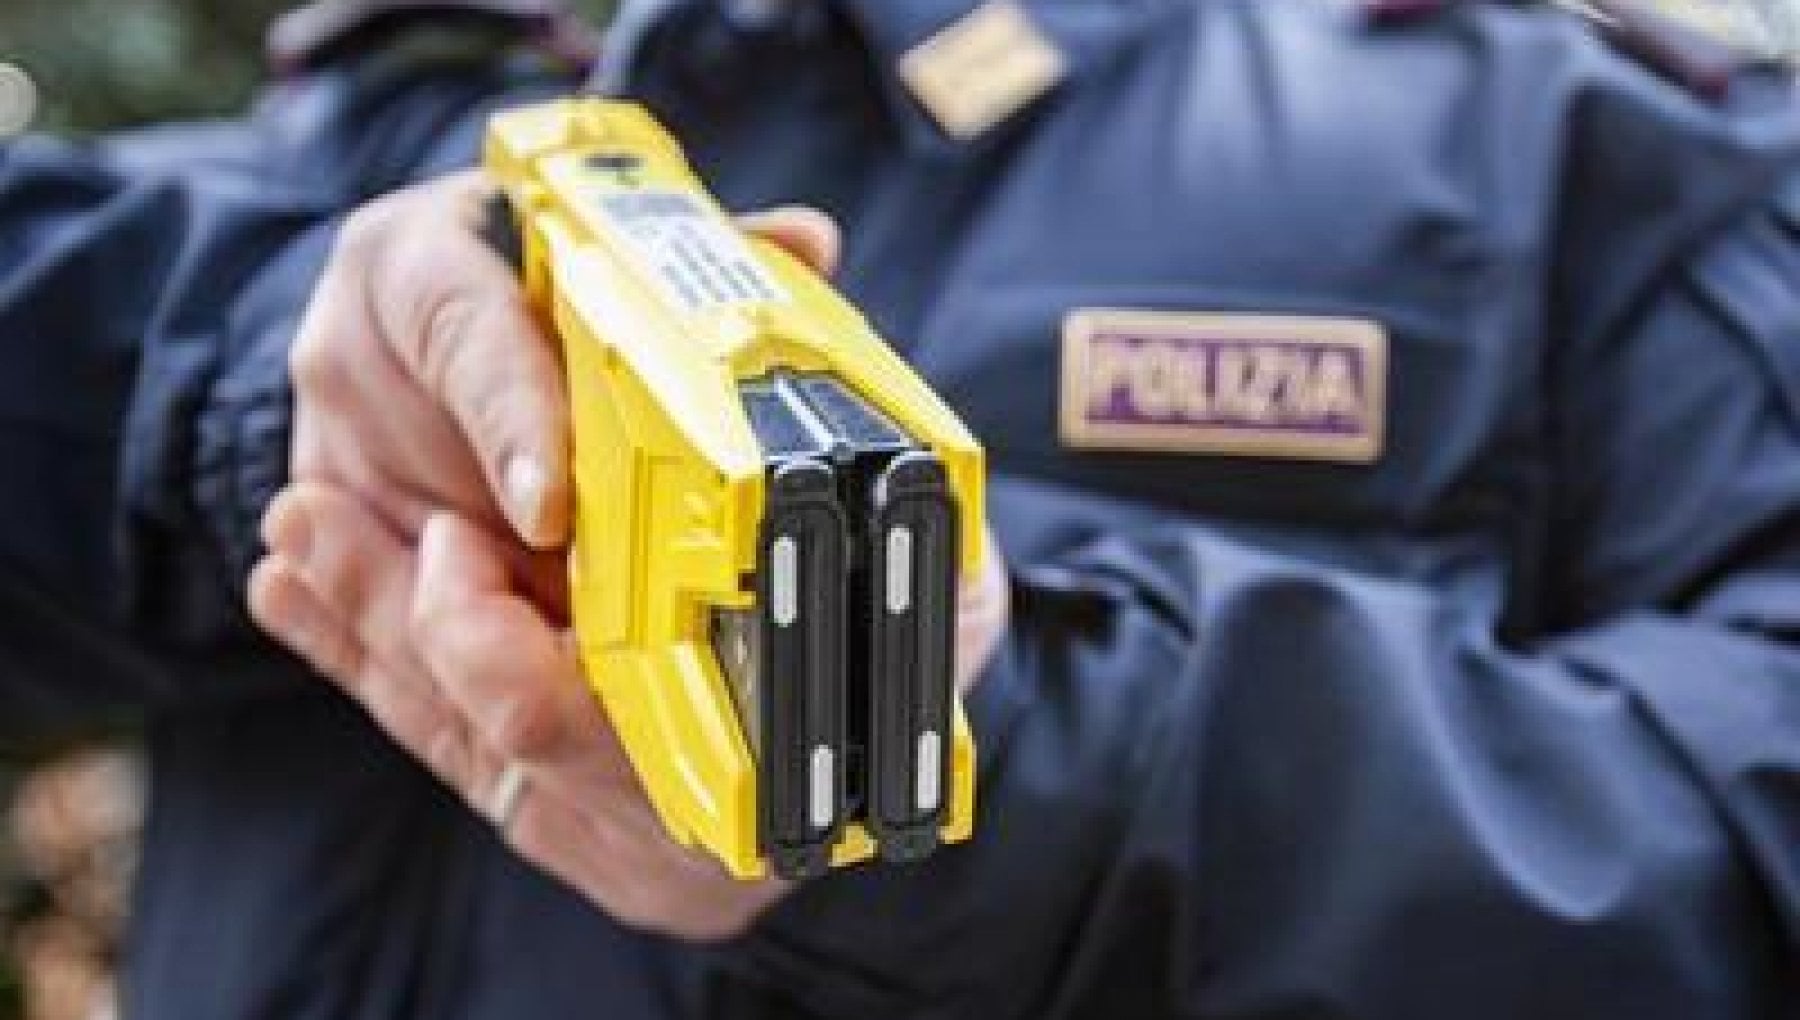 The taser is not harmless, it can be dangerous and even deadly